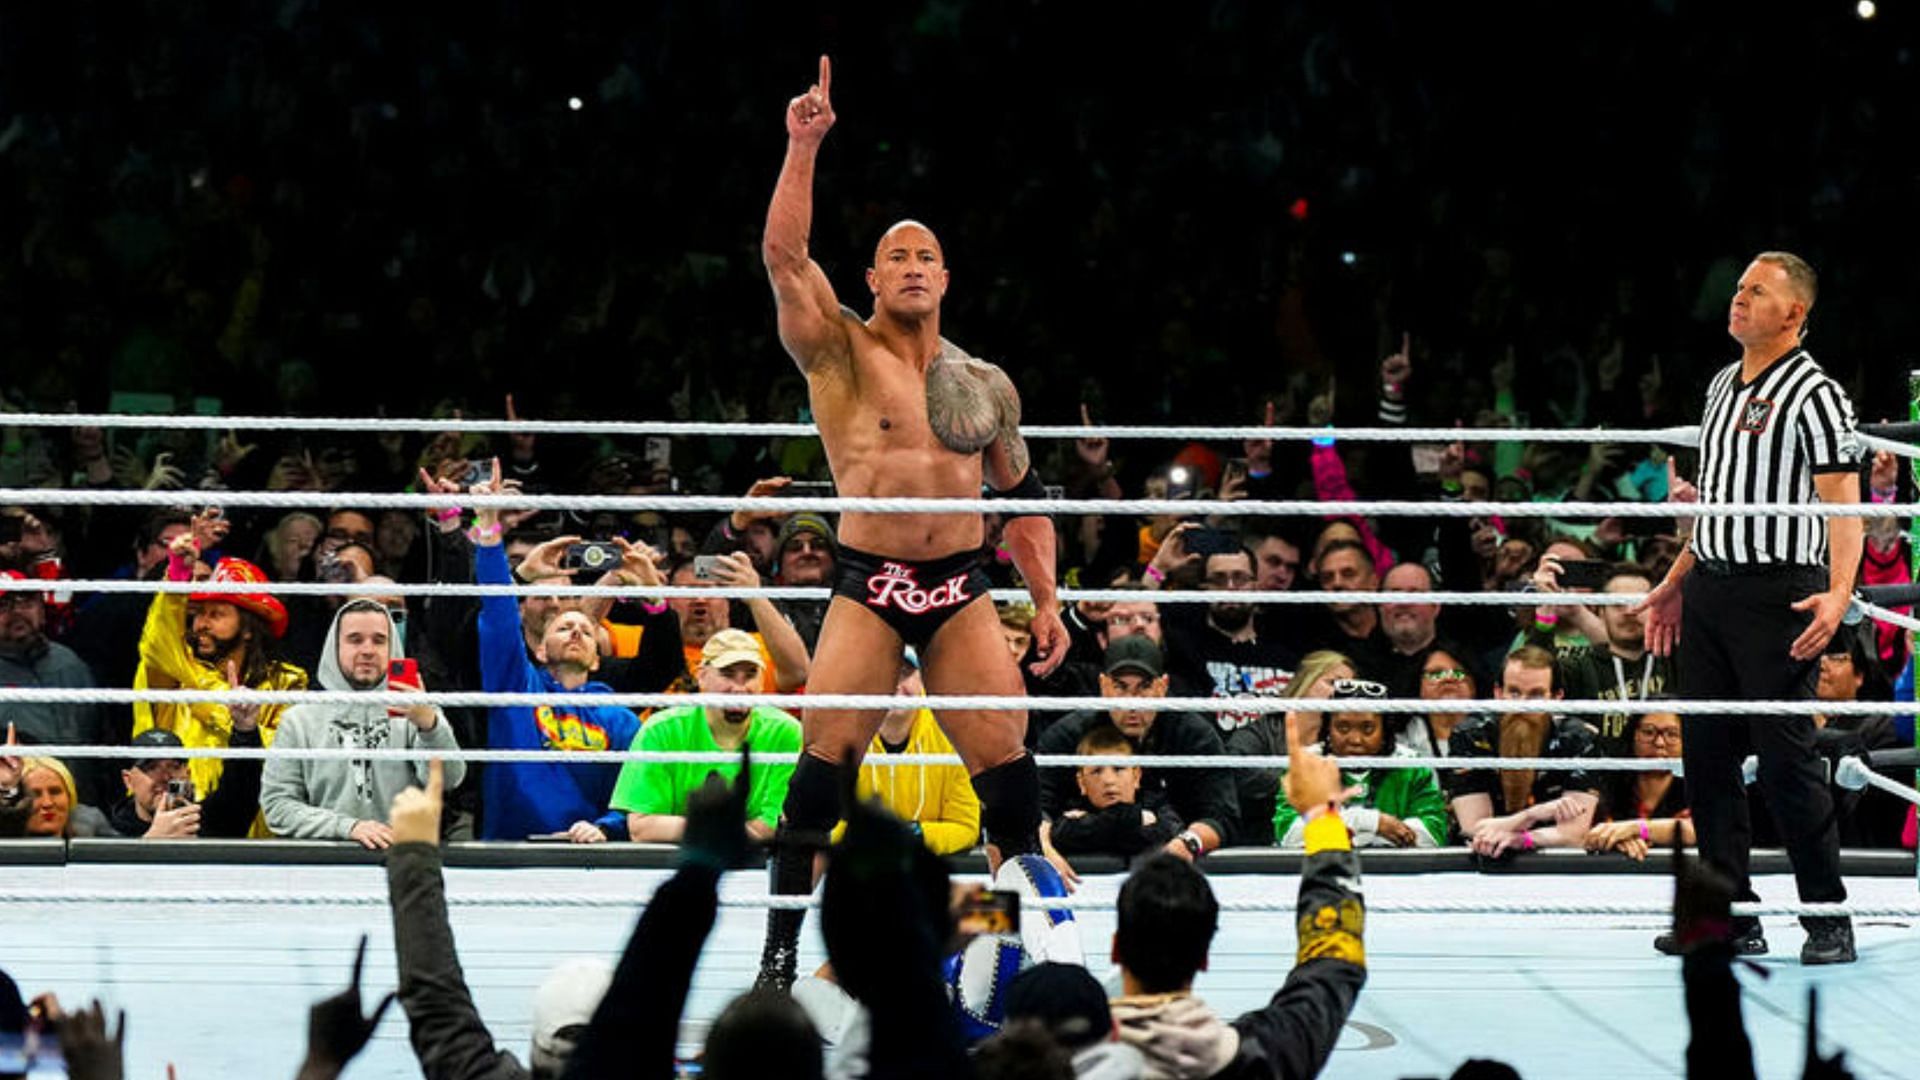 When will The Rock return to WWE?